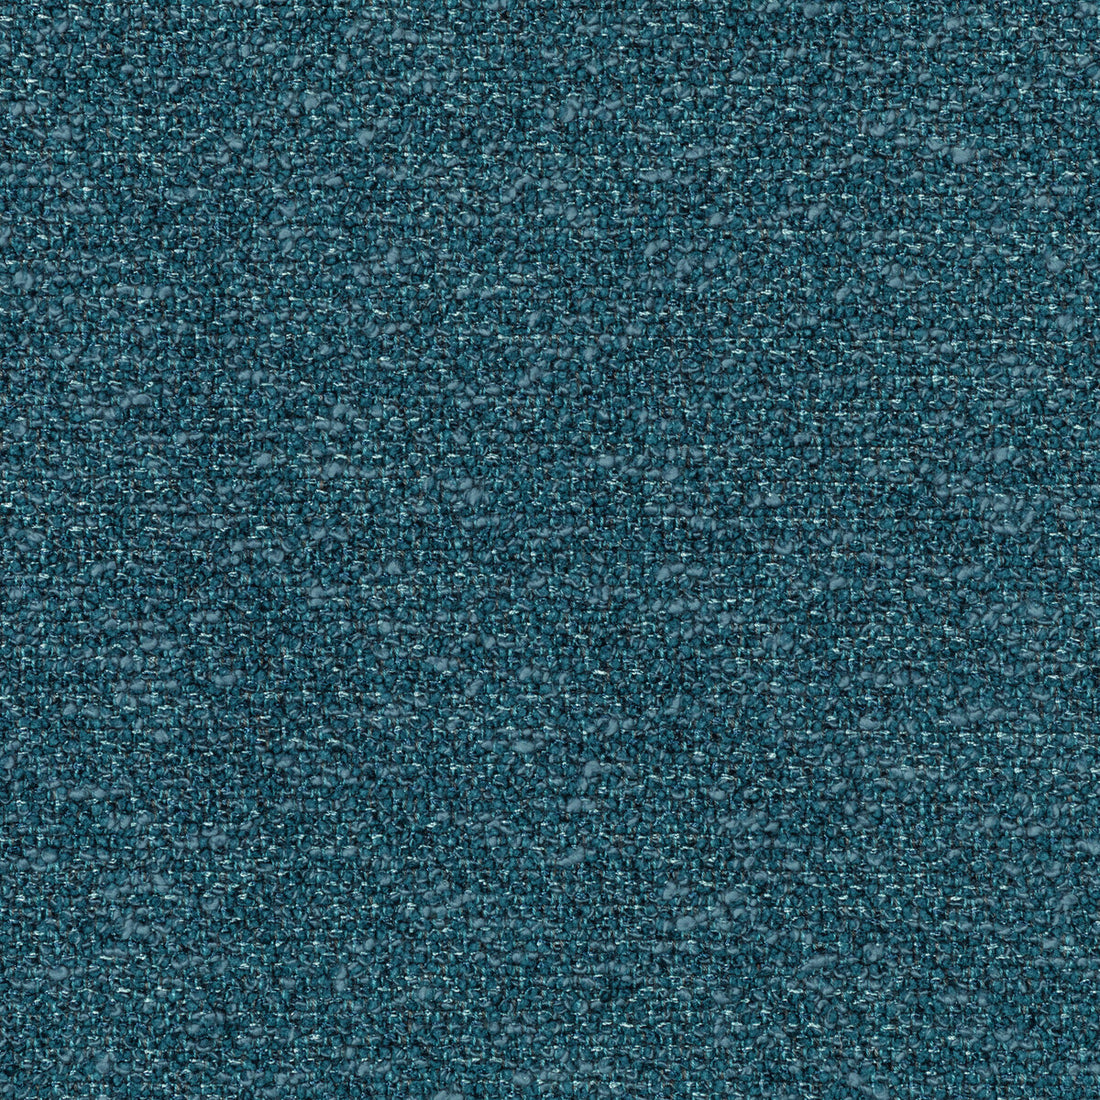 Bali Boucle fabric in indigo color - pattern 36051.5.0 - by Kravet Couture in the Luxury Textures II collection